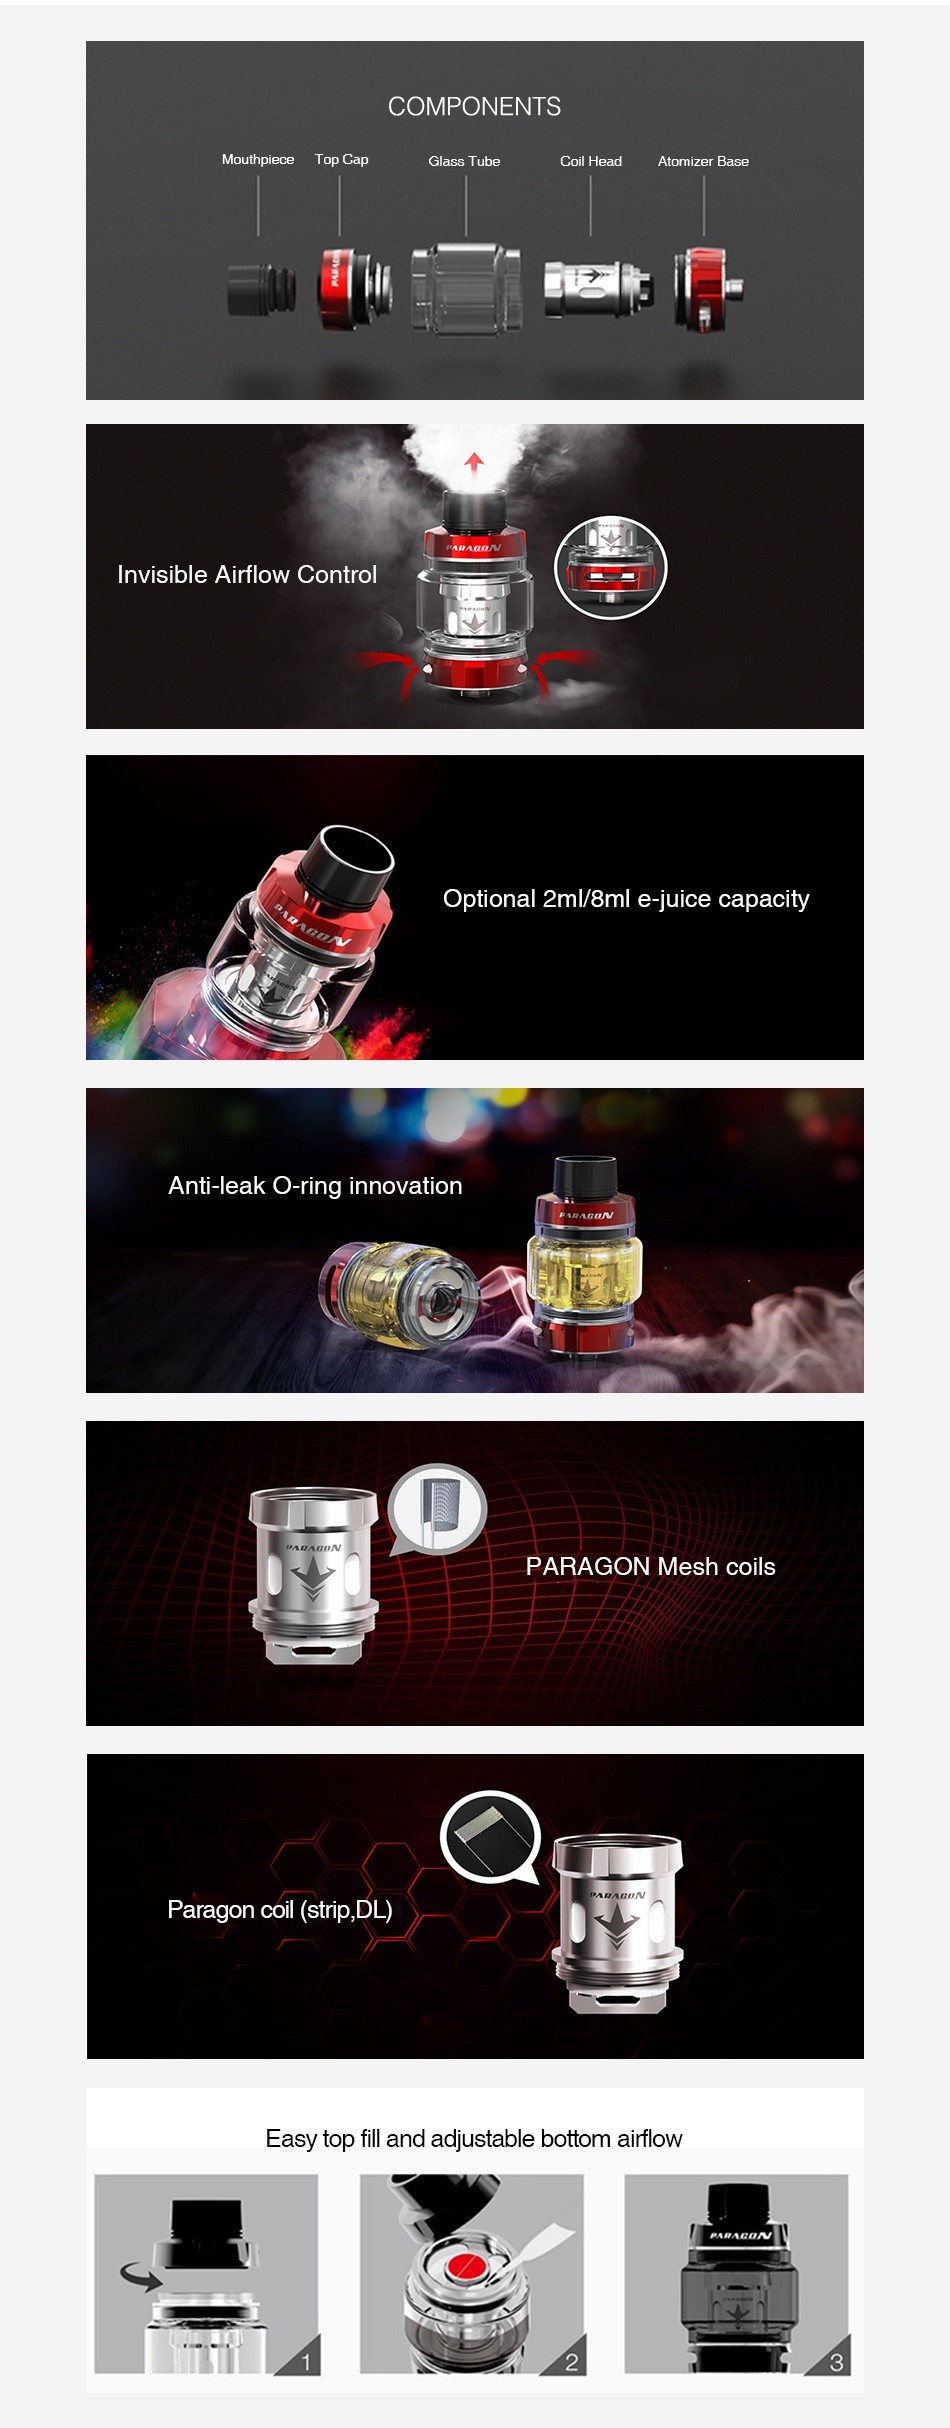 Vaptio Paragon Subohm Tank 8ml/2ml COMPONENTS Mouthpiece Top Gap lass Tutre Invisible airflow control Optional 2m 8ml e juice capacity Anti leak O ring innovation P ARagon Mesh coils Paragon coil strip  DL  Easy top fill and adjustable bottom airflow